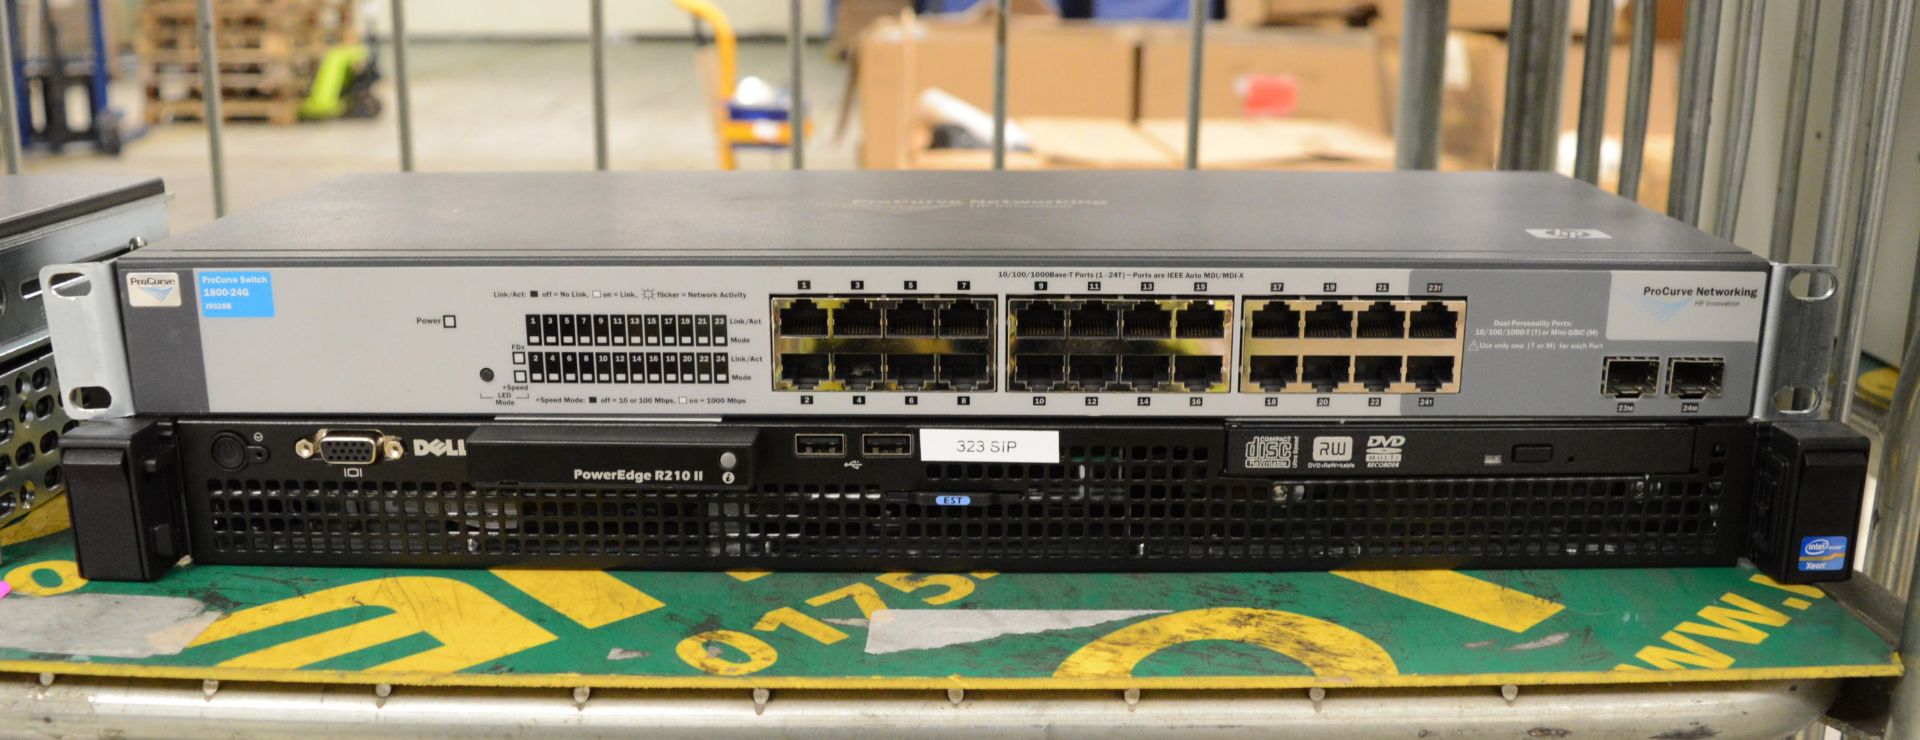 Network Hubs - Cisco Systems Catalyst 2950, HP KVM Switch, HP ProCurve Switch 1800-24G, De - Image 3 of 5